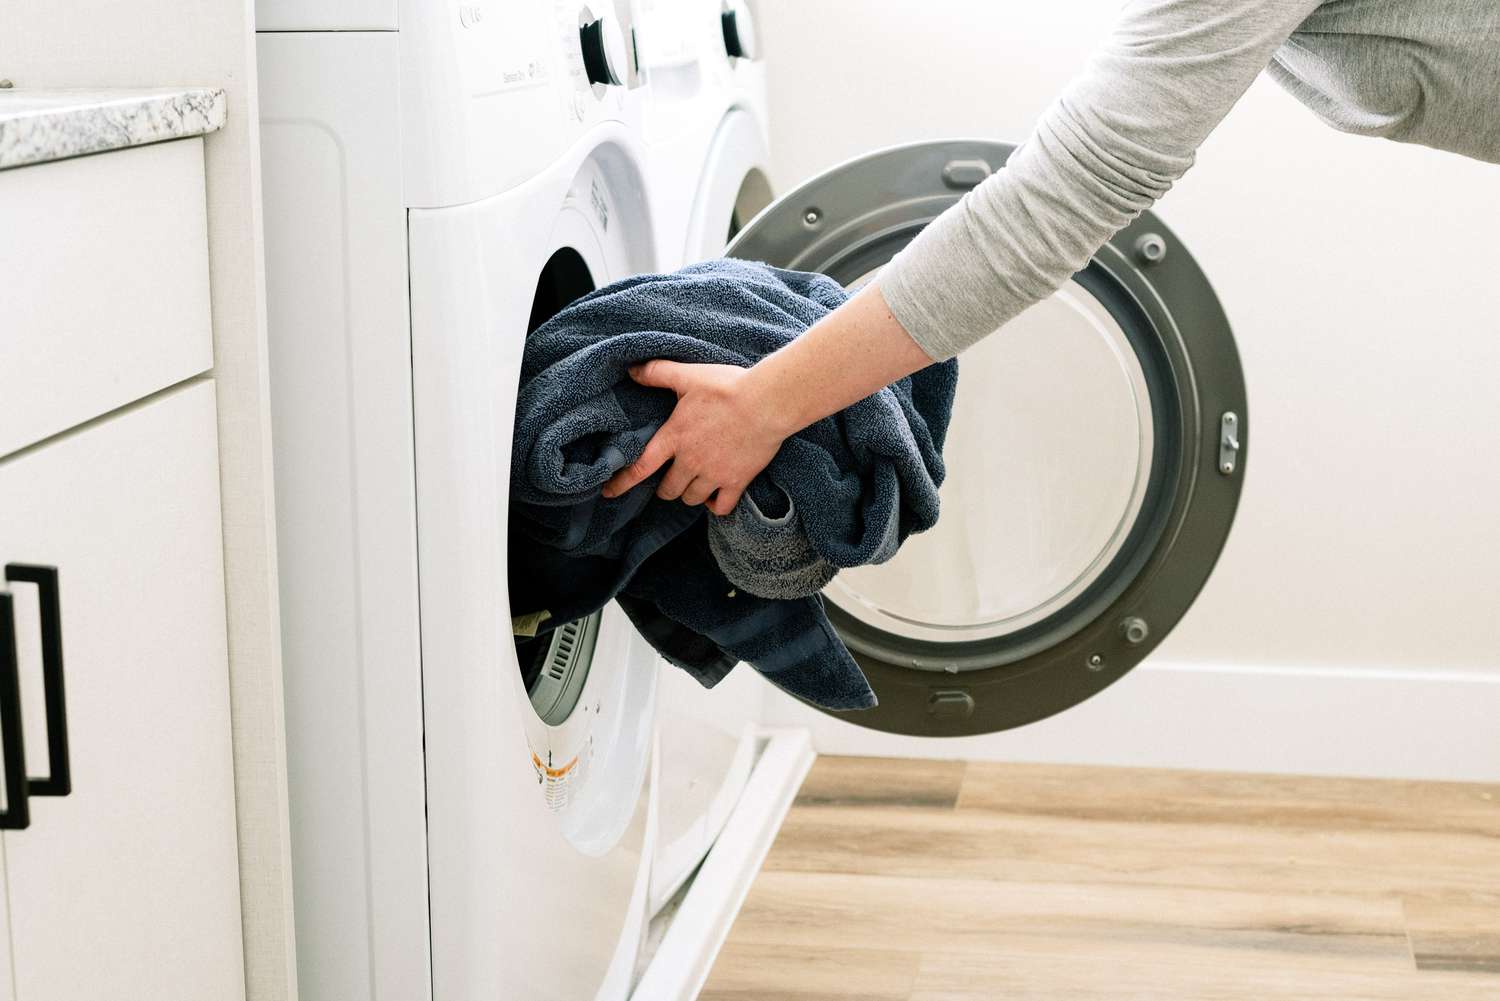 Things You Should Not Put In A Dryer, Laundry Experts Warn